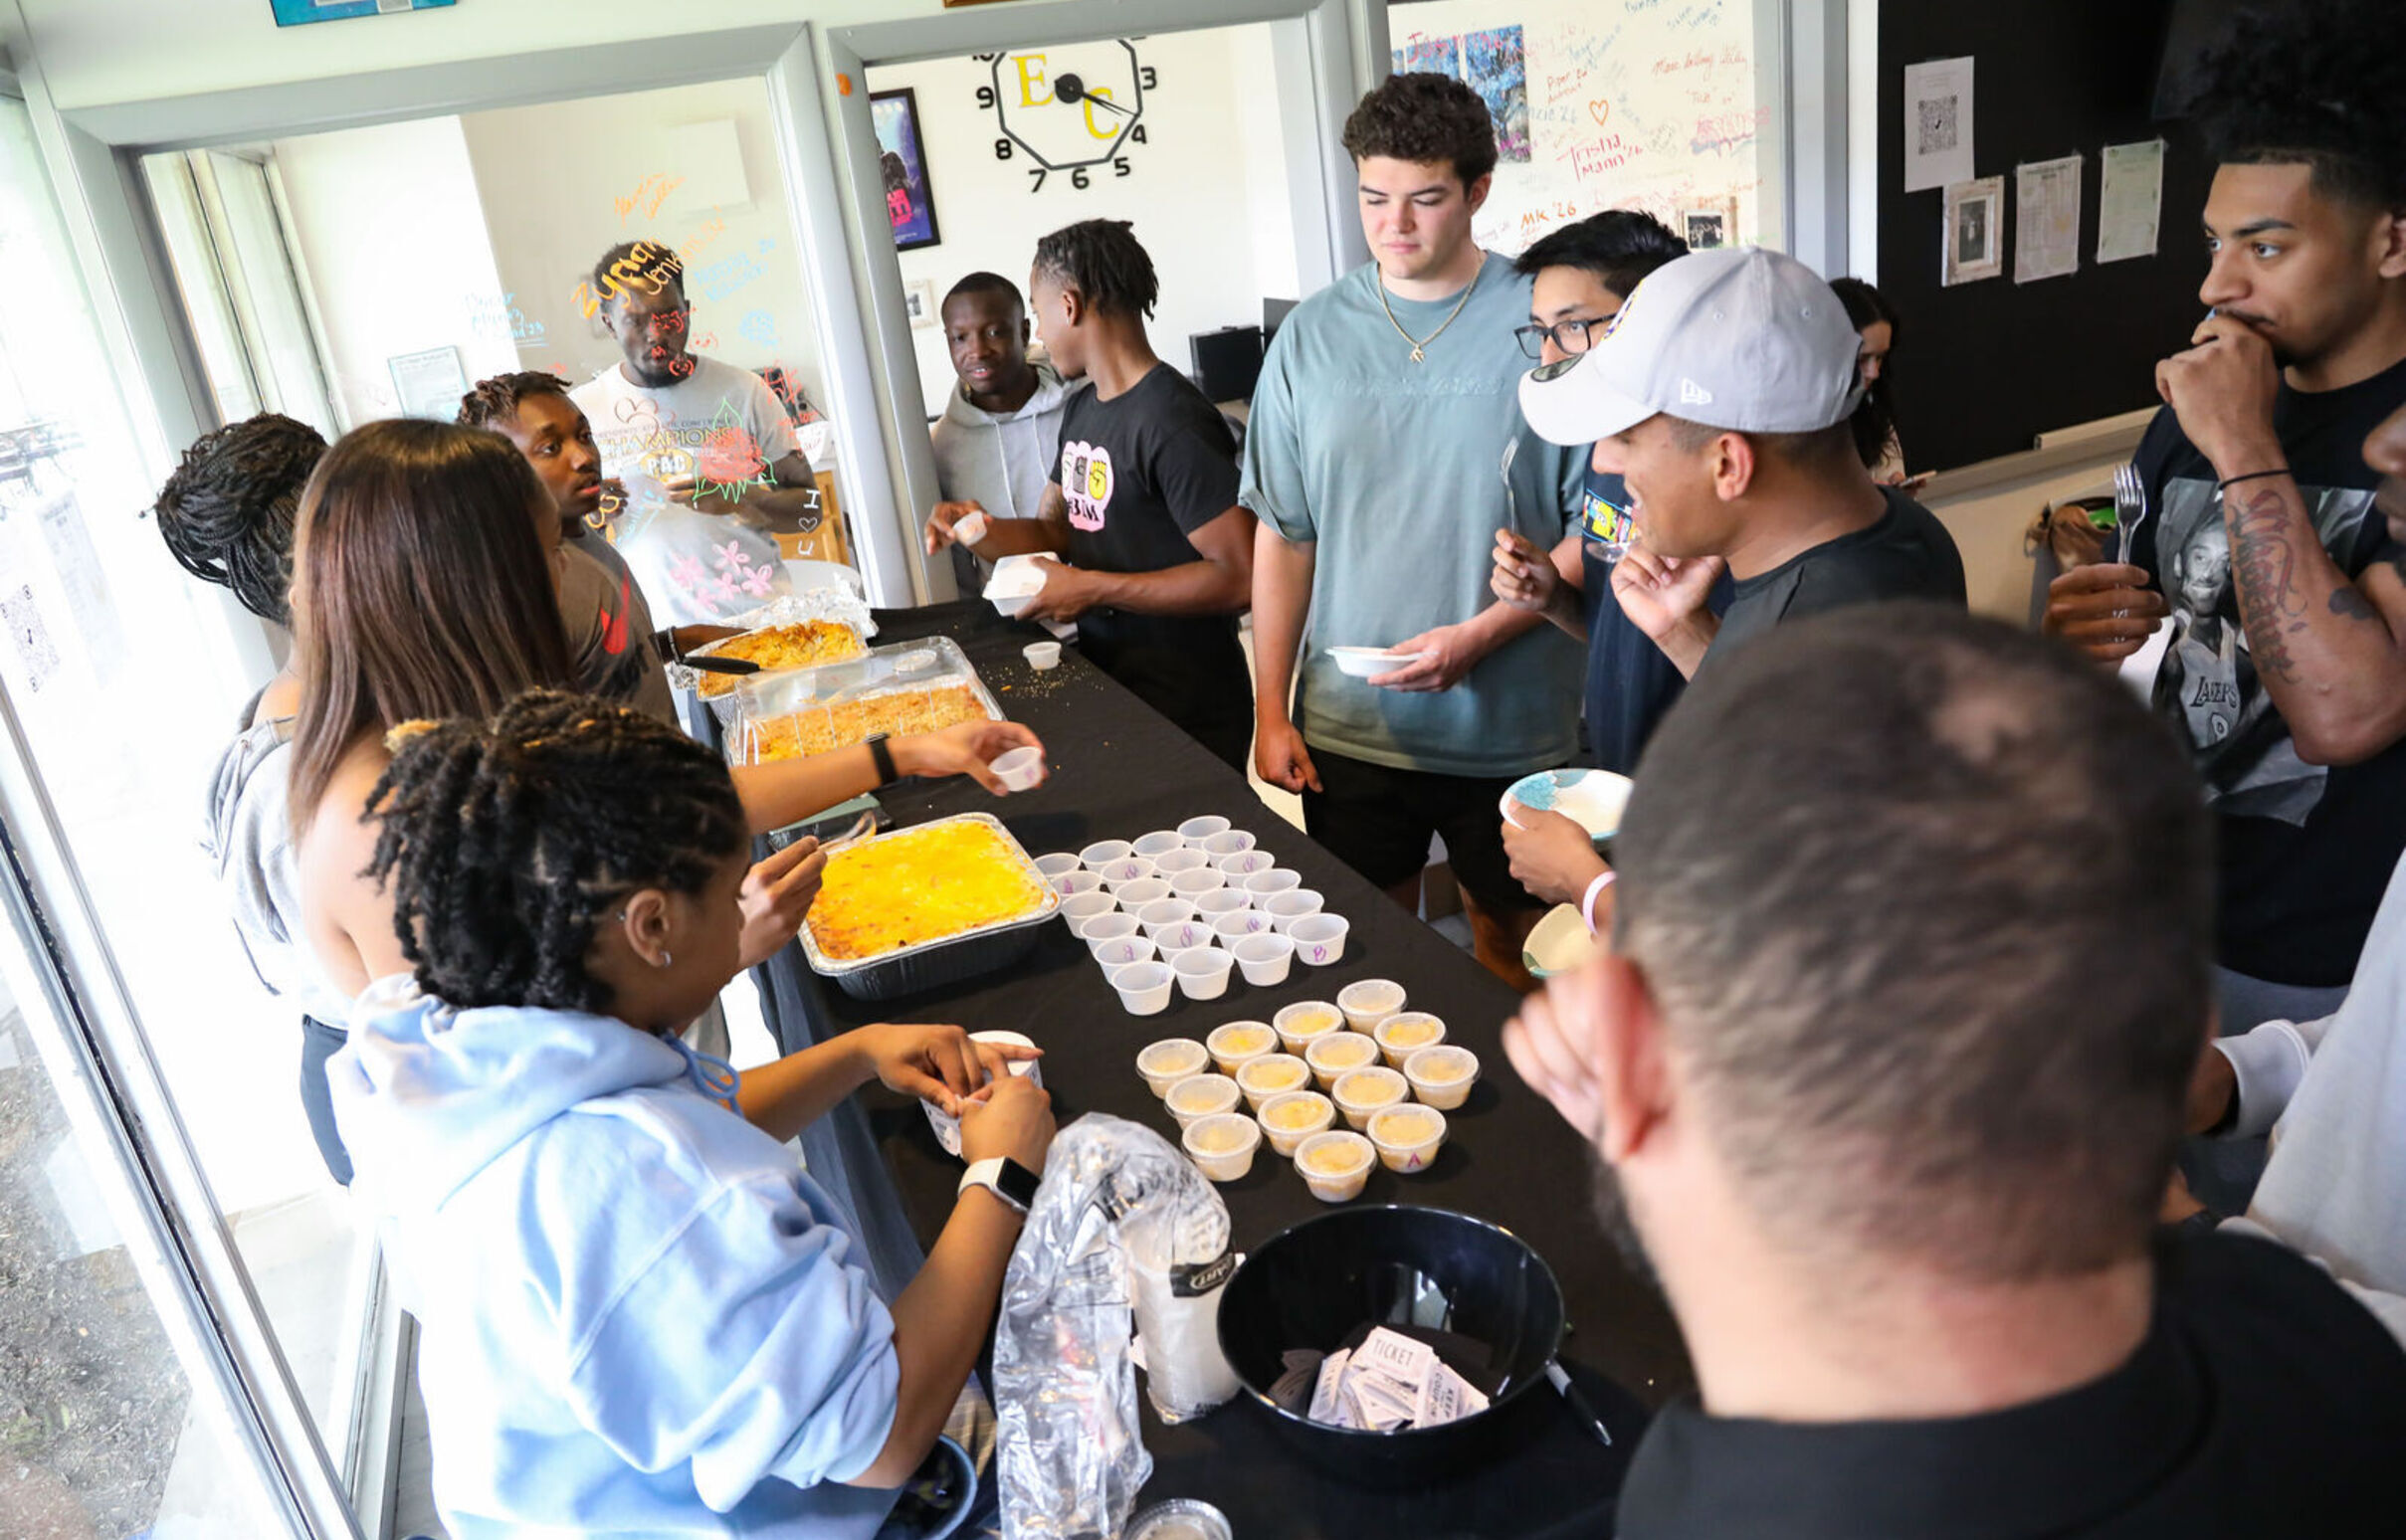 People try samples of macaroni and cheese during the BSU's Mac Off